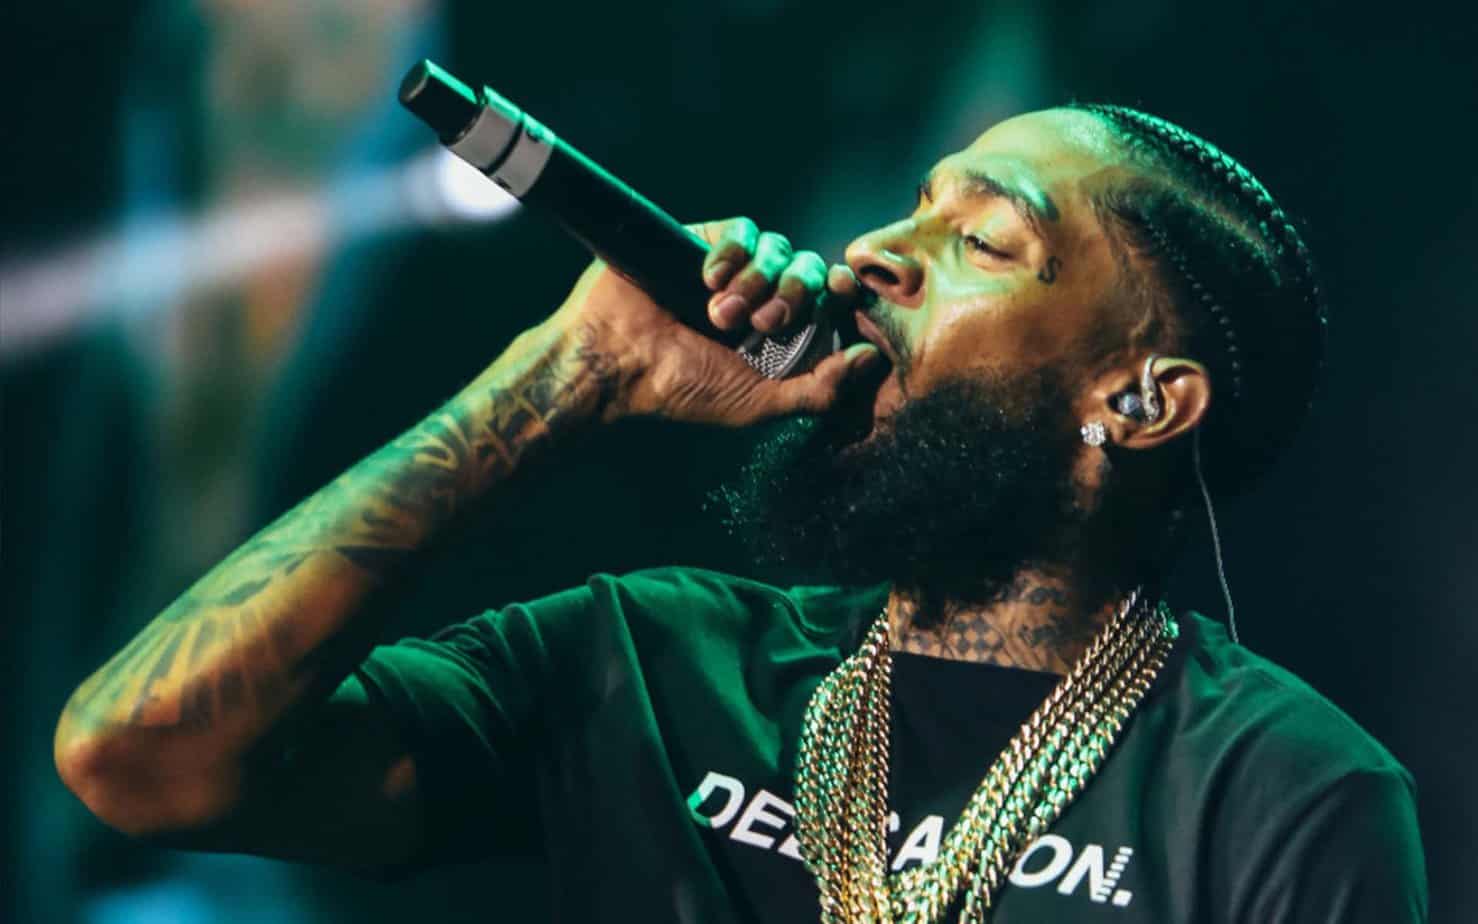 NIPSEY HUSSLE TRIBUTE - Remembering one of the greats